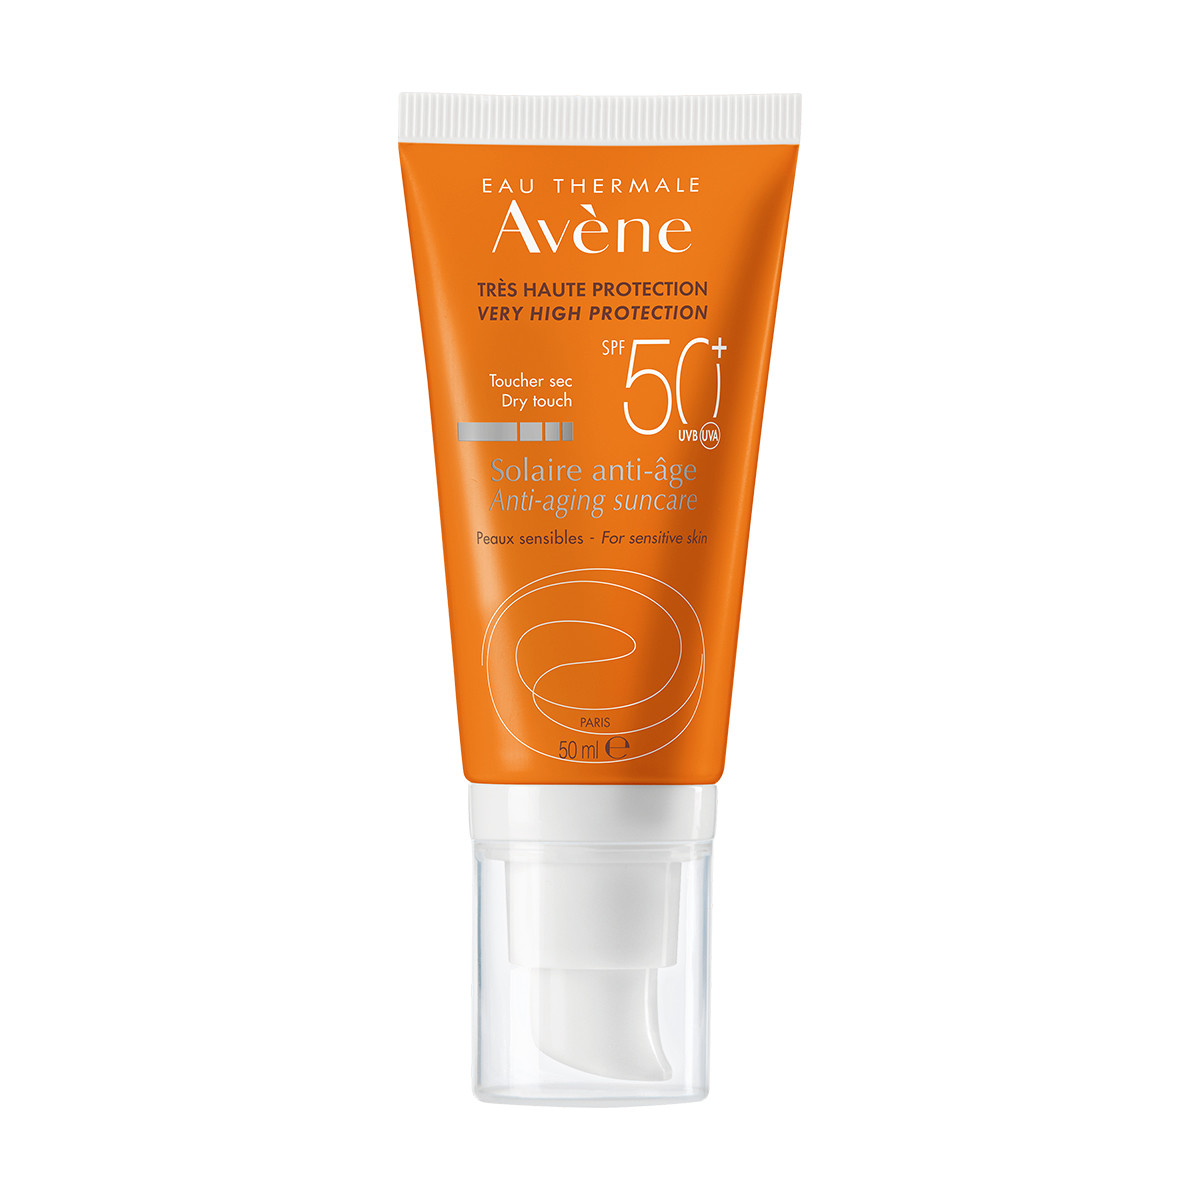 avene eau thermale solaire anti age dry touch spf50 50ml)